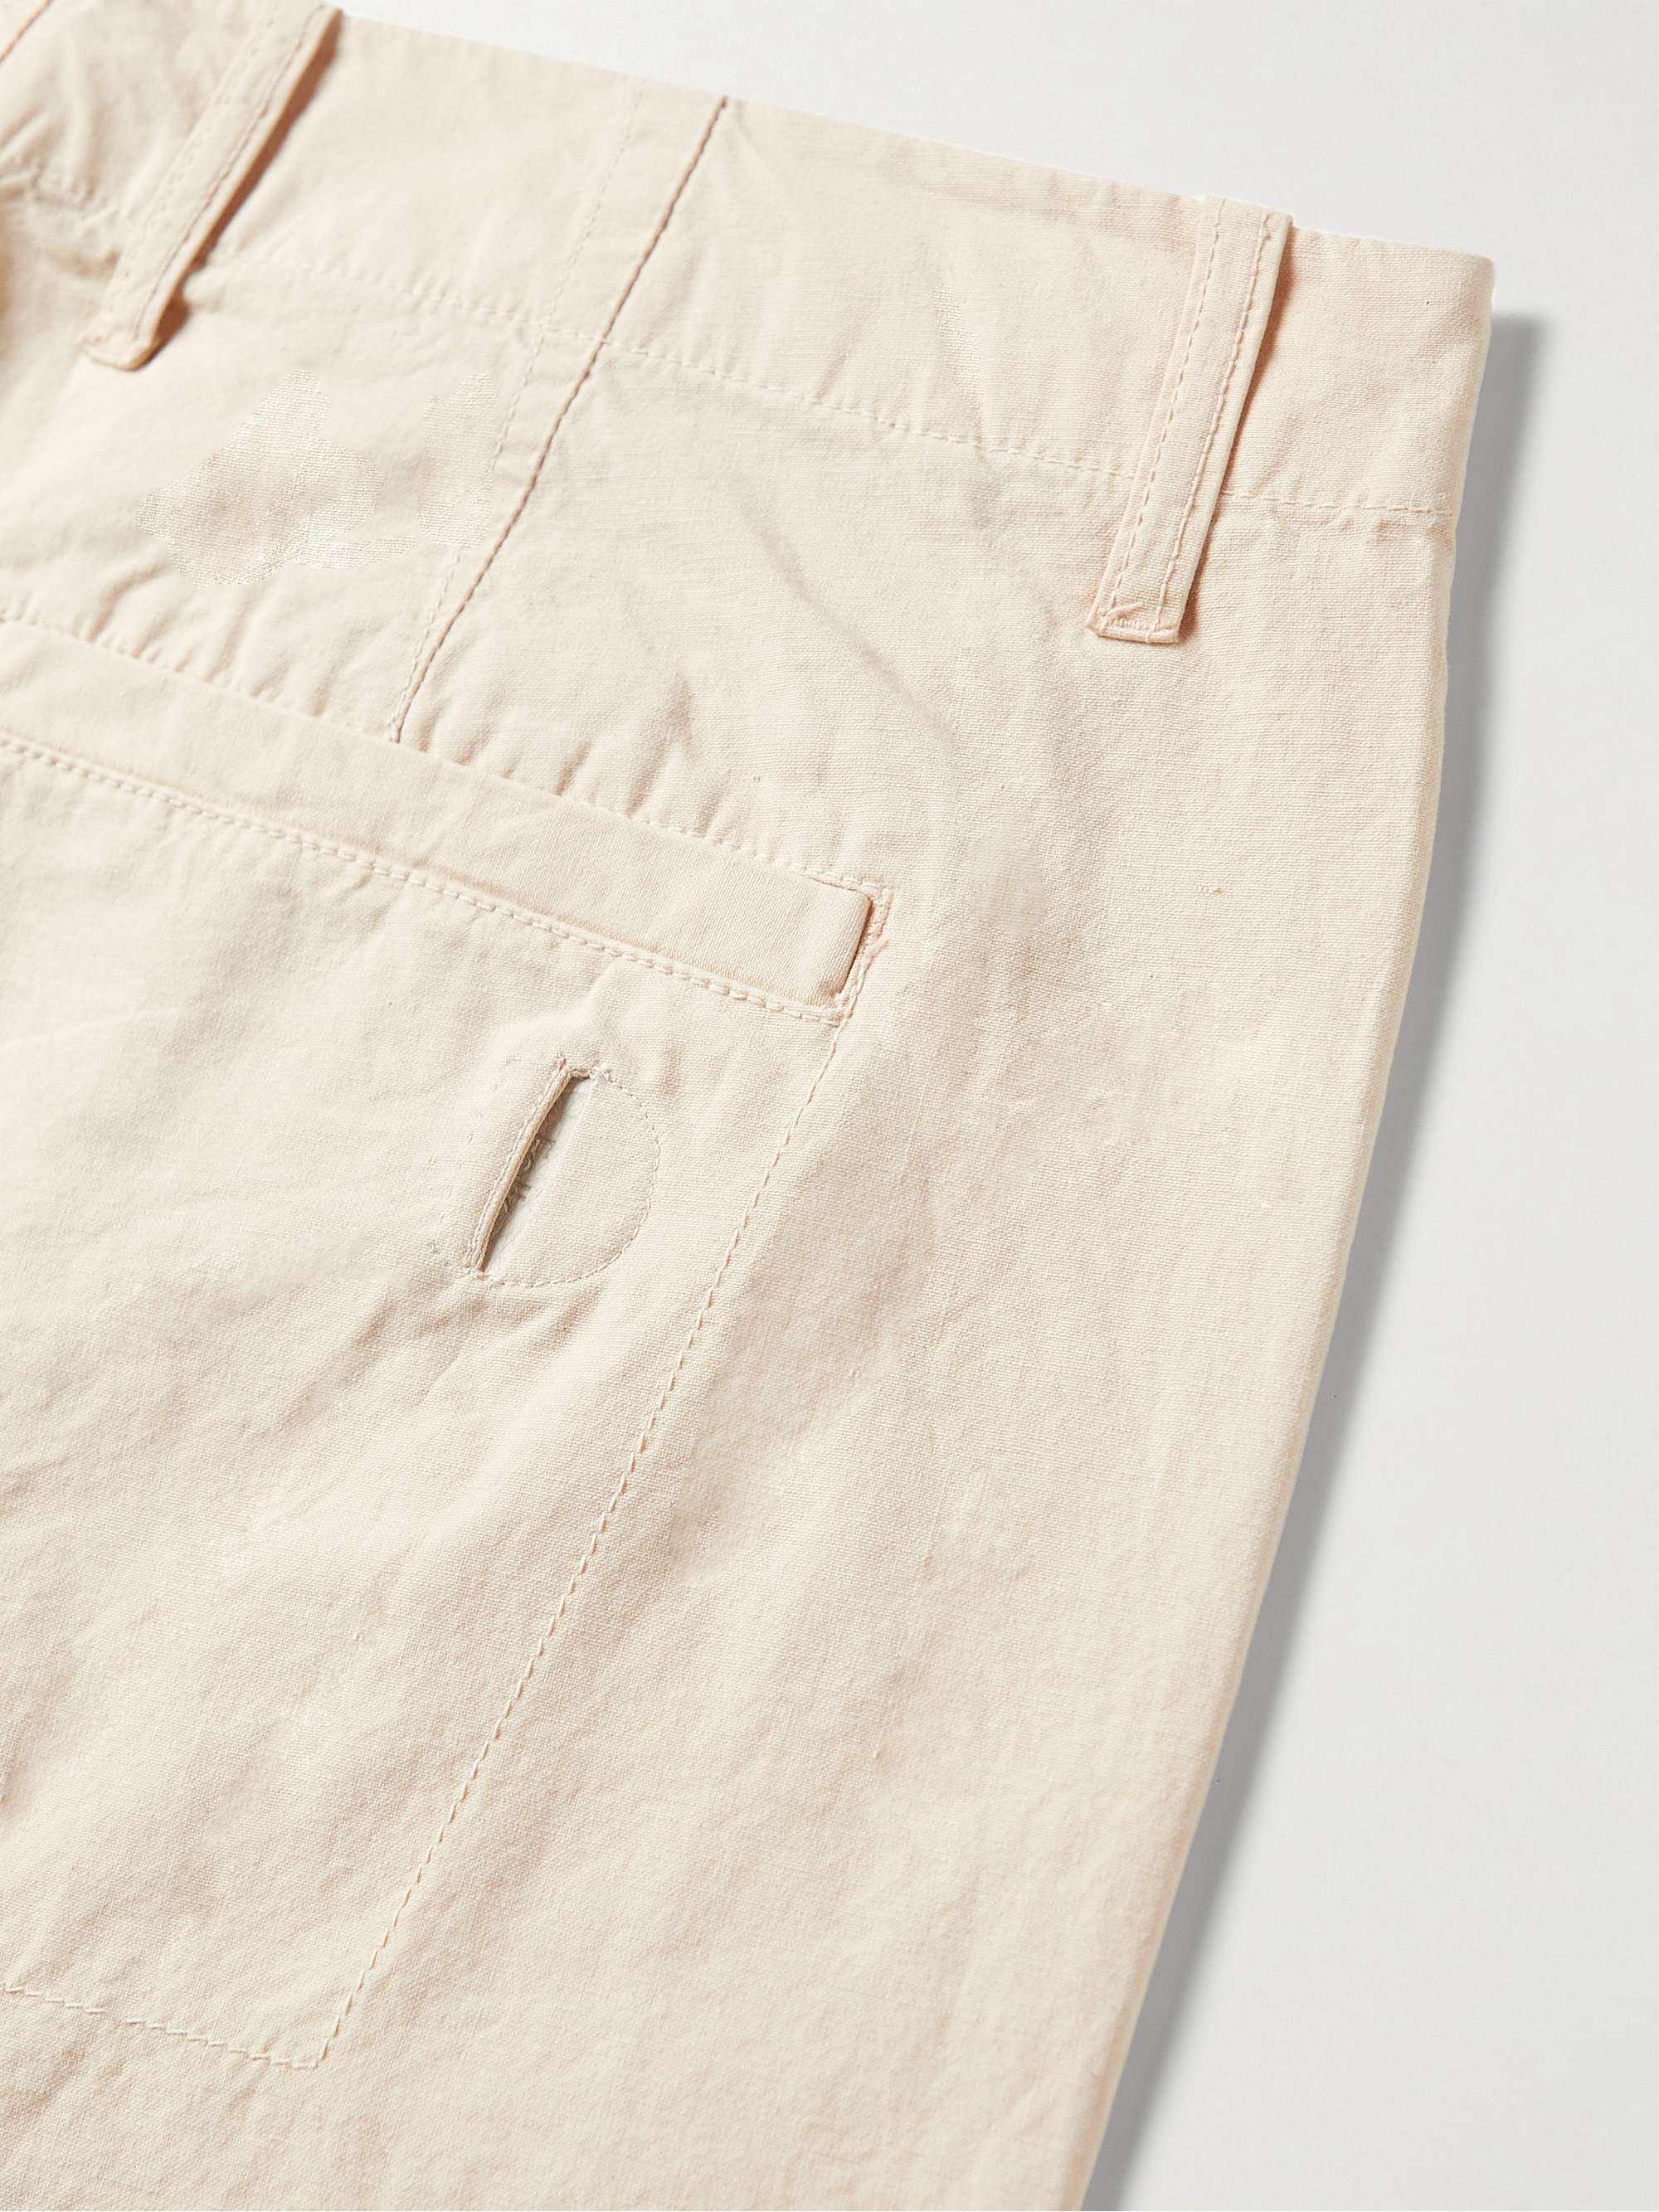 FOLK + Damien Poulain Assembly Tapered Crinkled-Cotton Trousers